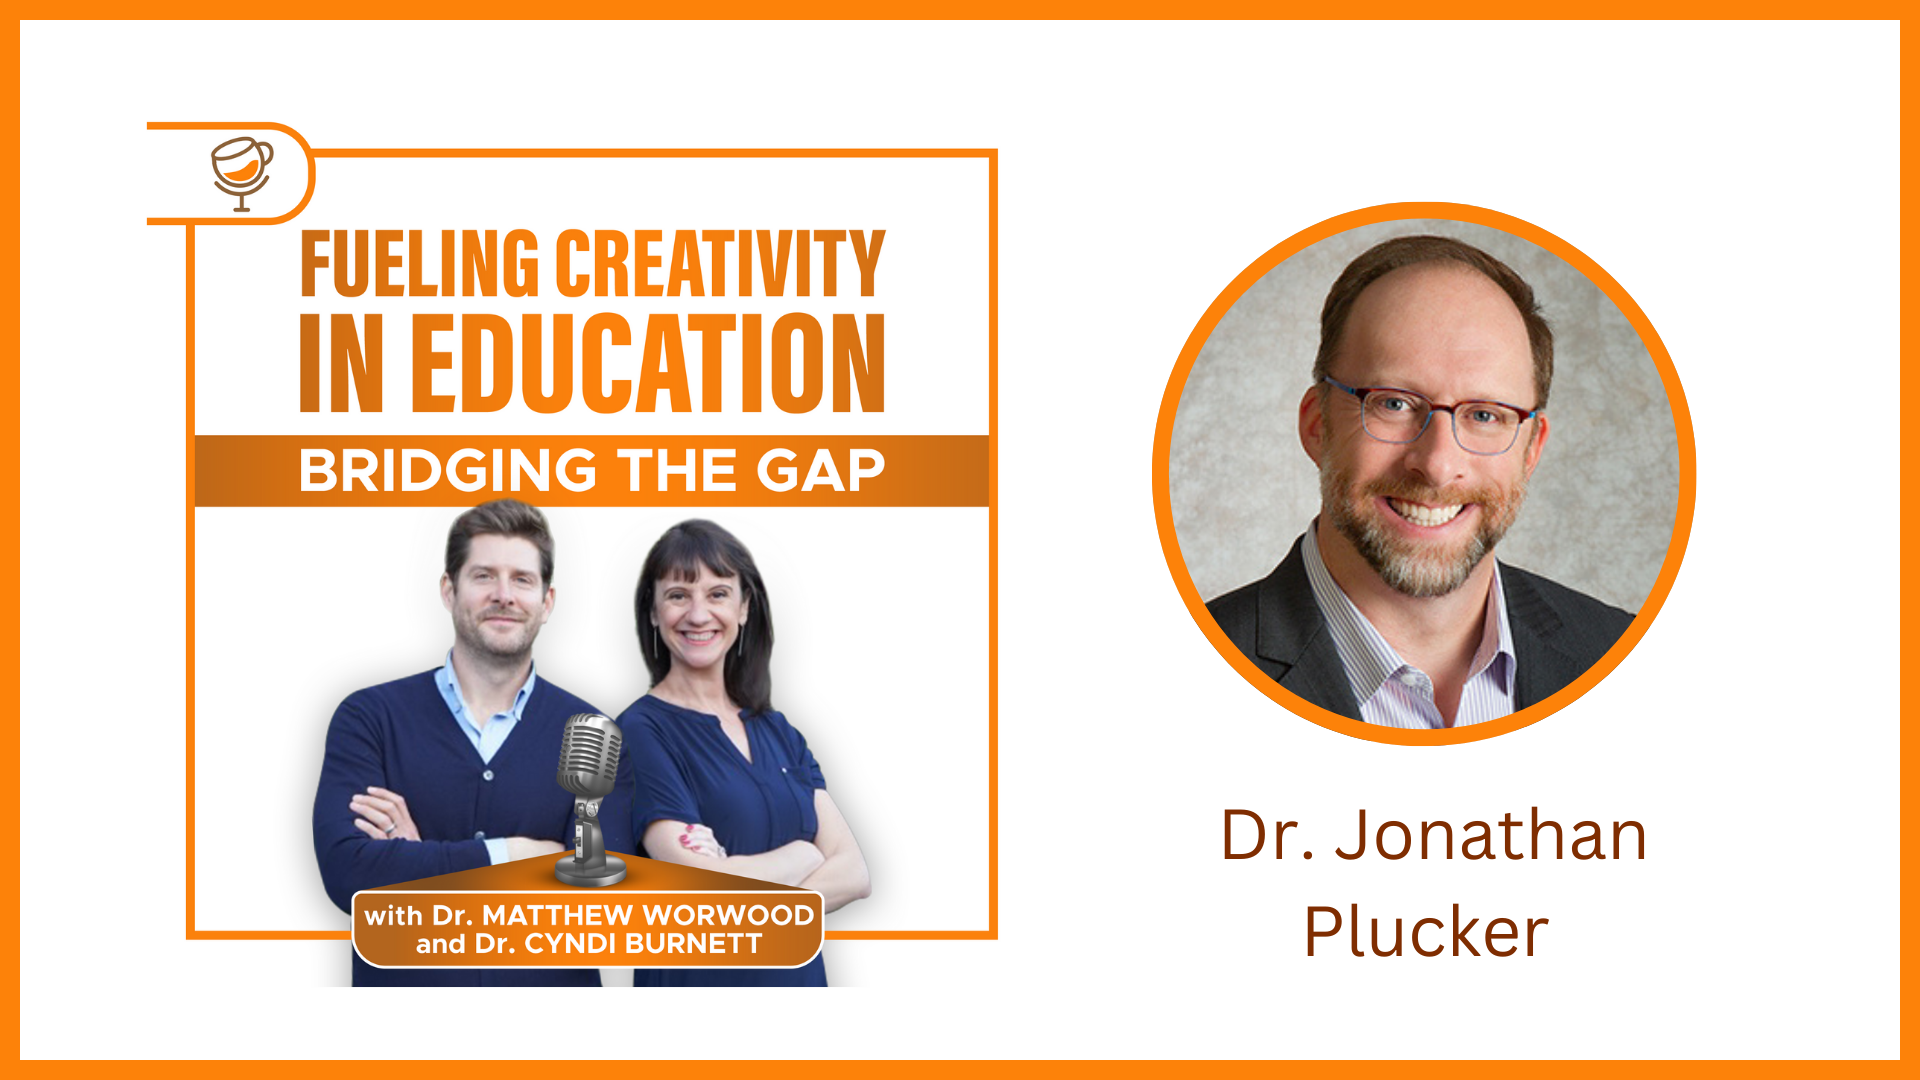 Discussing Excellence Gaps and Creativity with Dr. Jonathan Plucker - Part 2